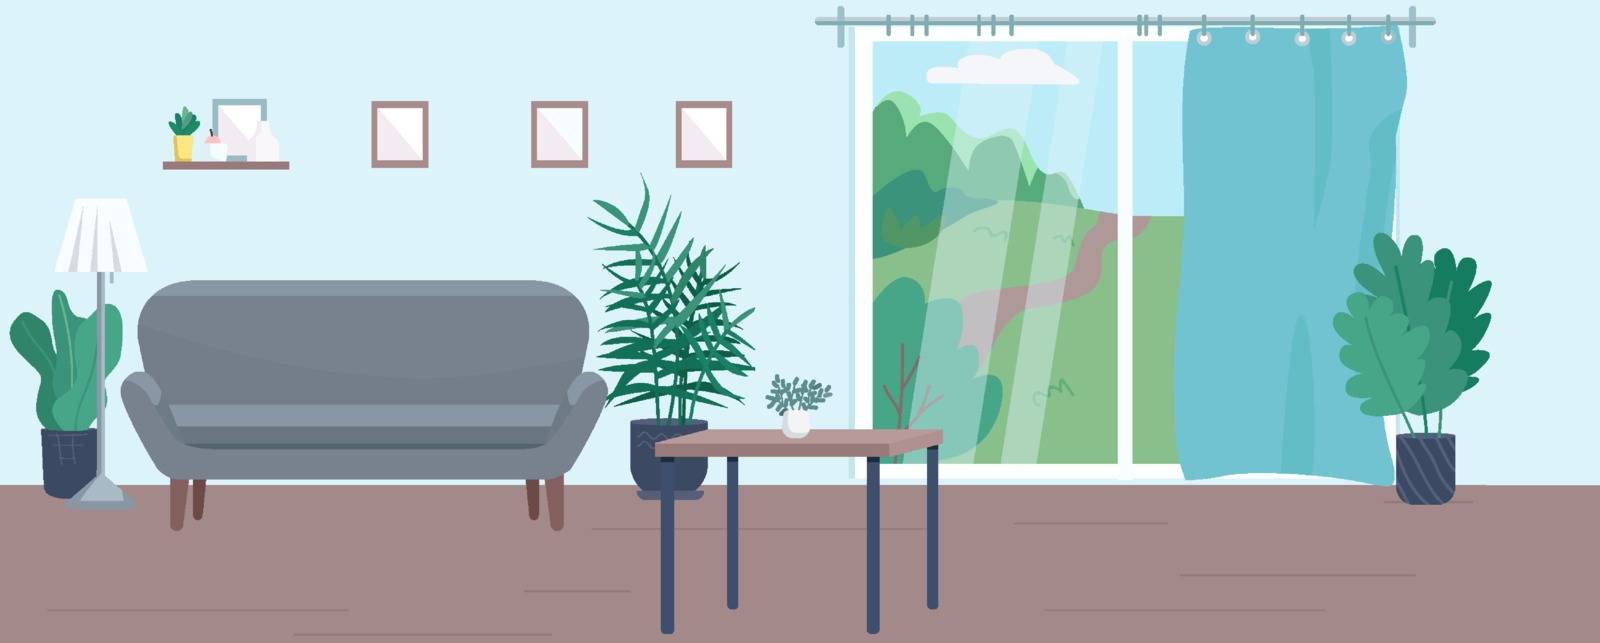 Empty living room flat color vector illustration. Contemporary home 2D cartoon interior decor with furniture on background. Comfortable accommodation furnishing, cozy apartment with no people